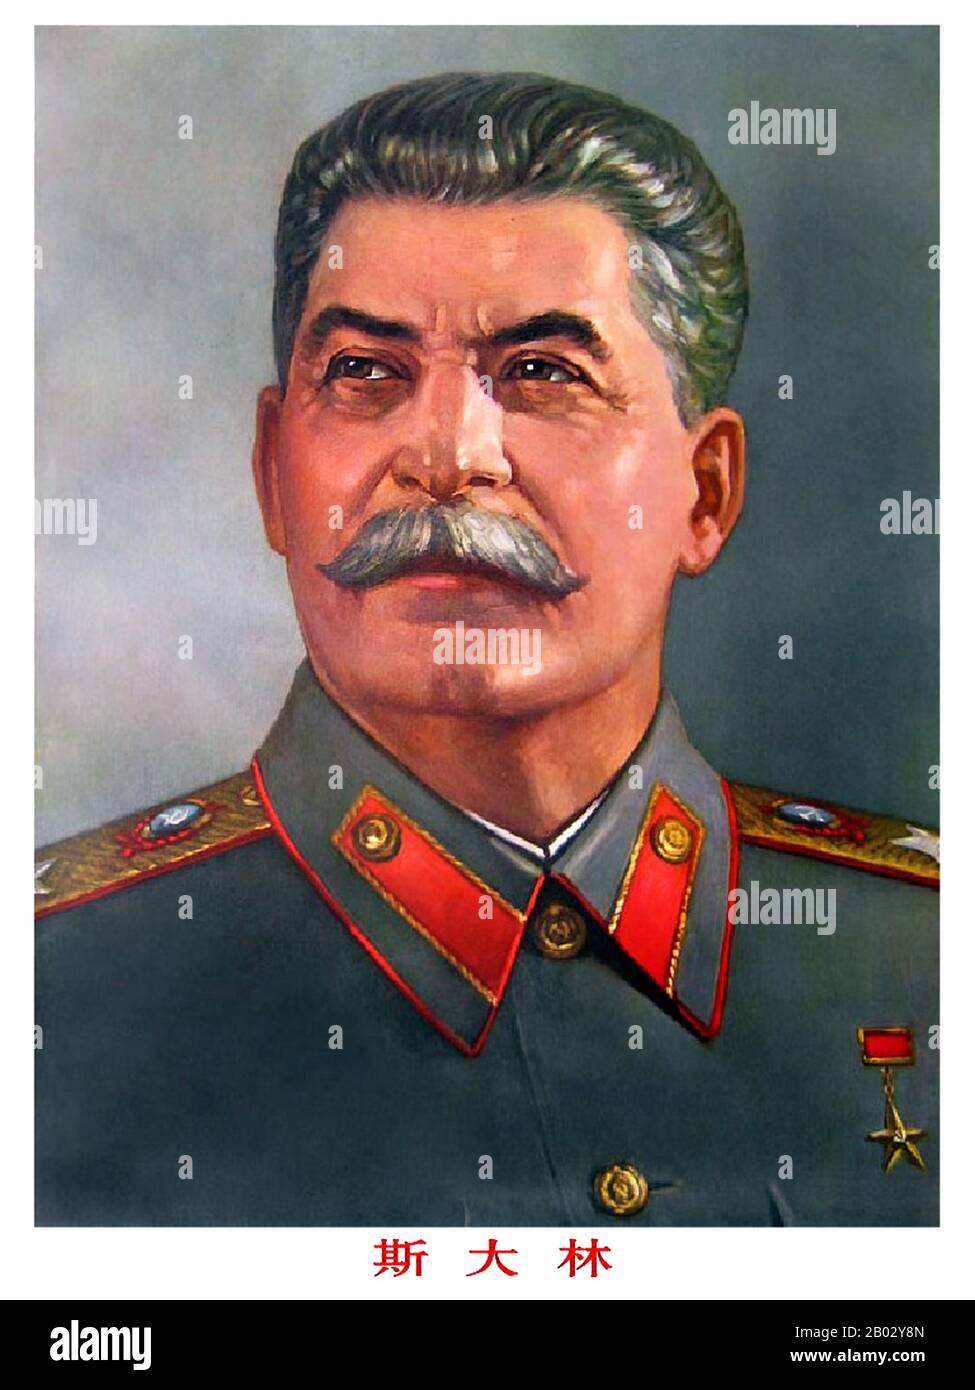 Joseph Vissarionovich Stalin (18 December 1878 – 5 March 1953) was the  first General Secretary of the Communist Party of the Soviet Union's  Central Committee from 1922 until his death in 1953.